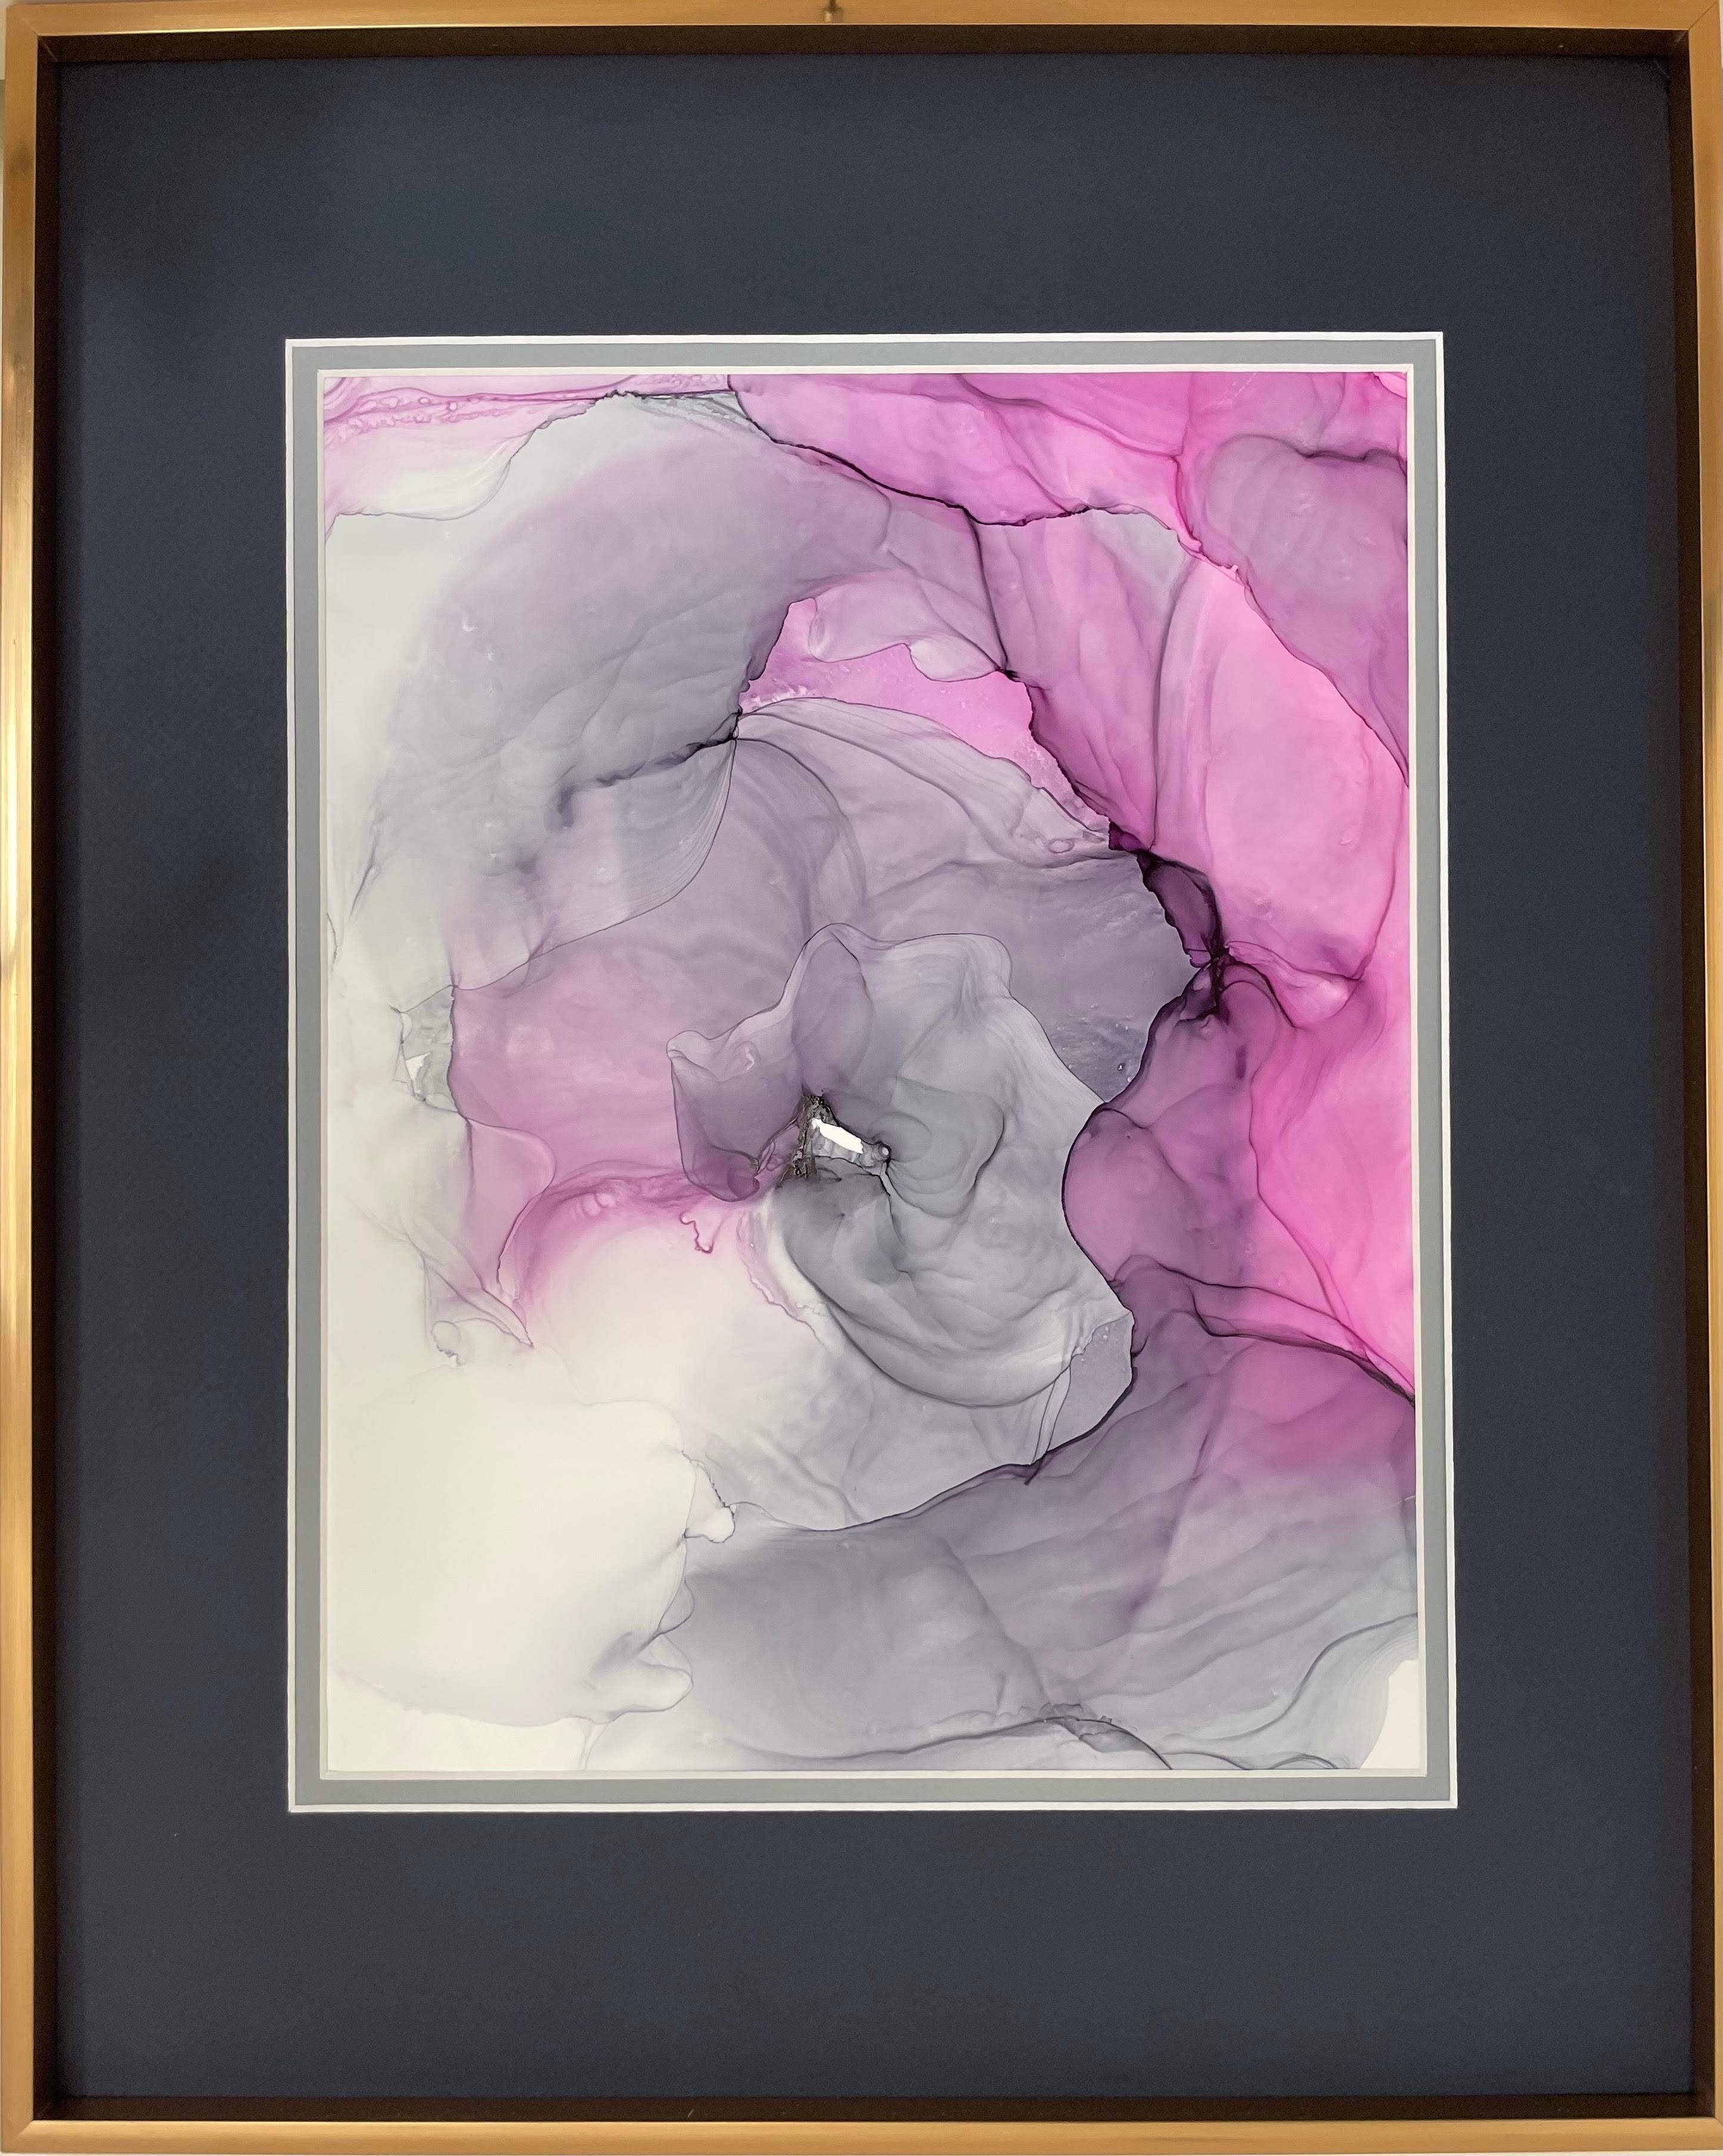 Pink dreams II - abstraction art, made in gray, pink, fuchsia color